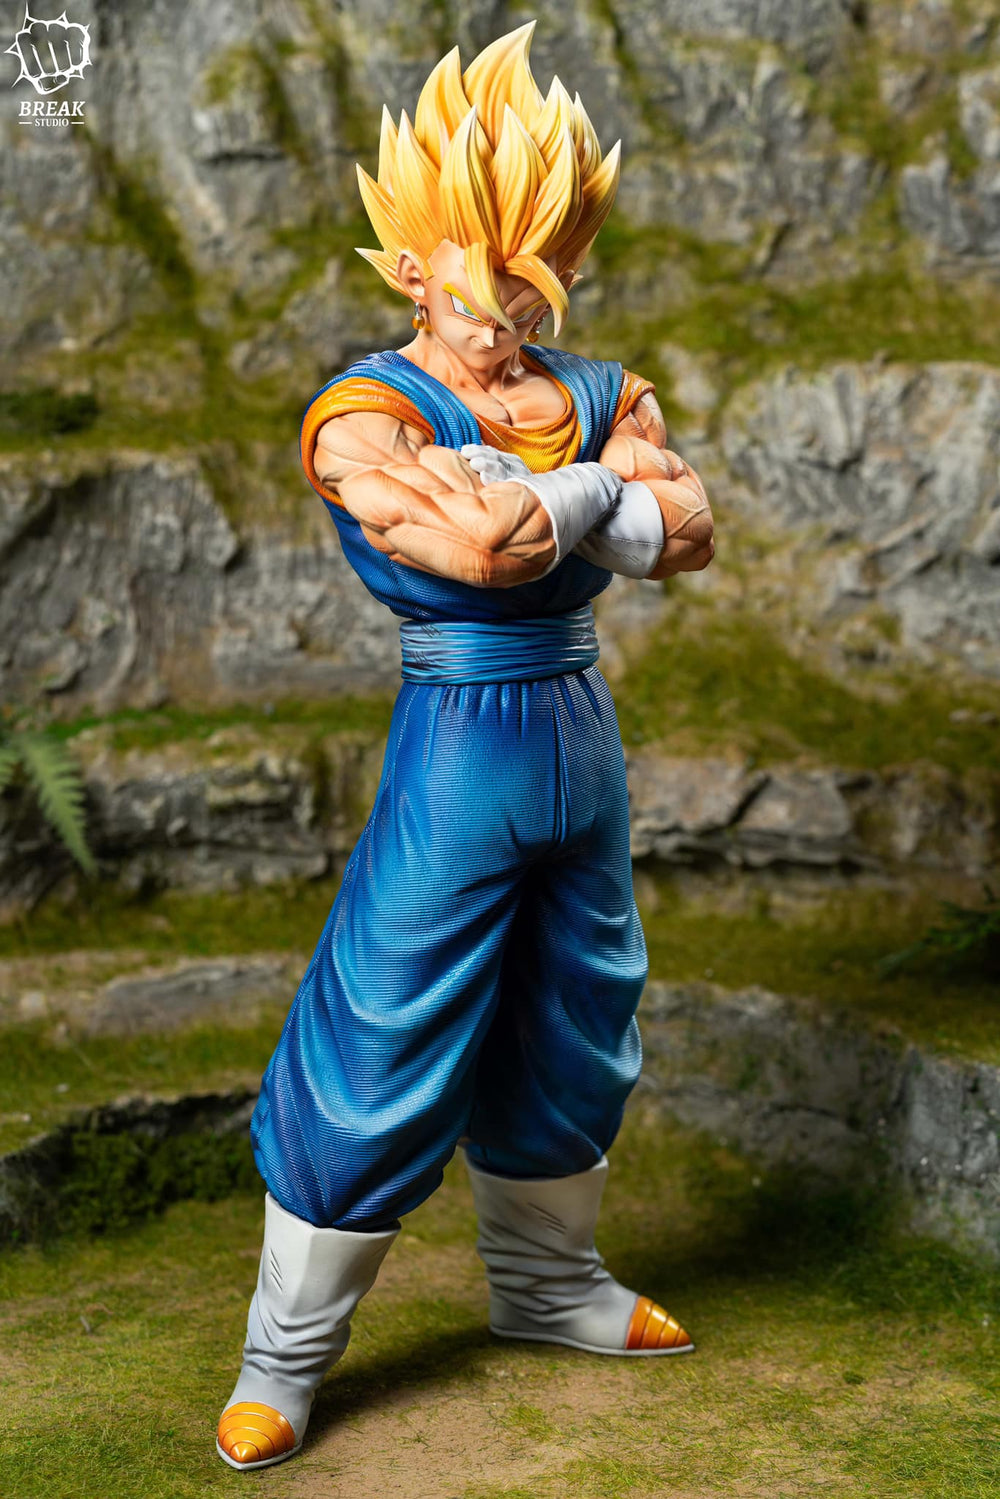 PREORDER Break Studio - Vegetto (Yellow, Black And Blue Hair Version Sold Separately)